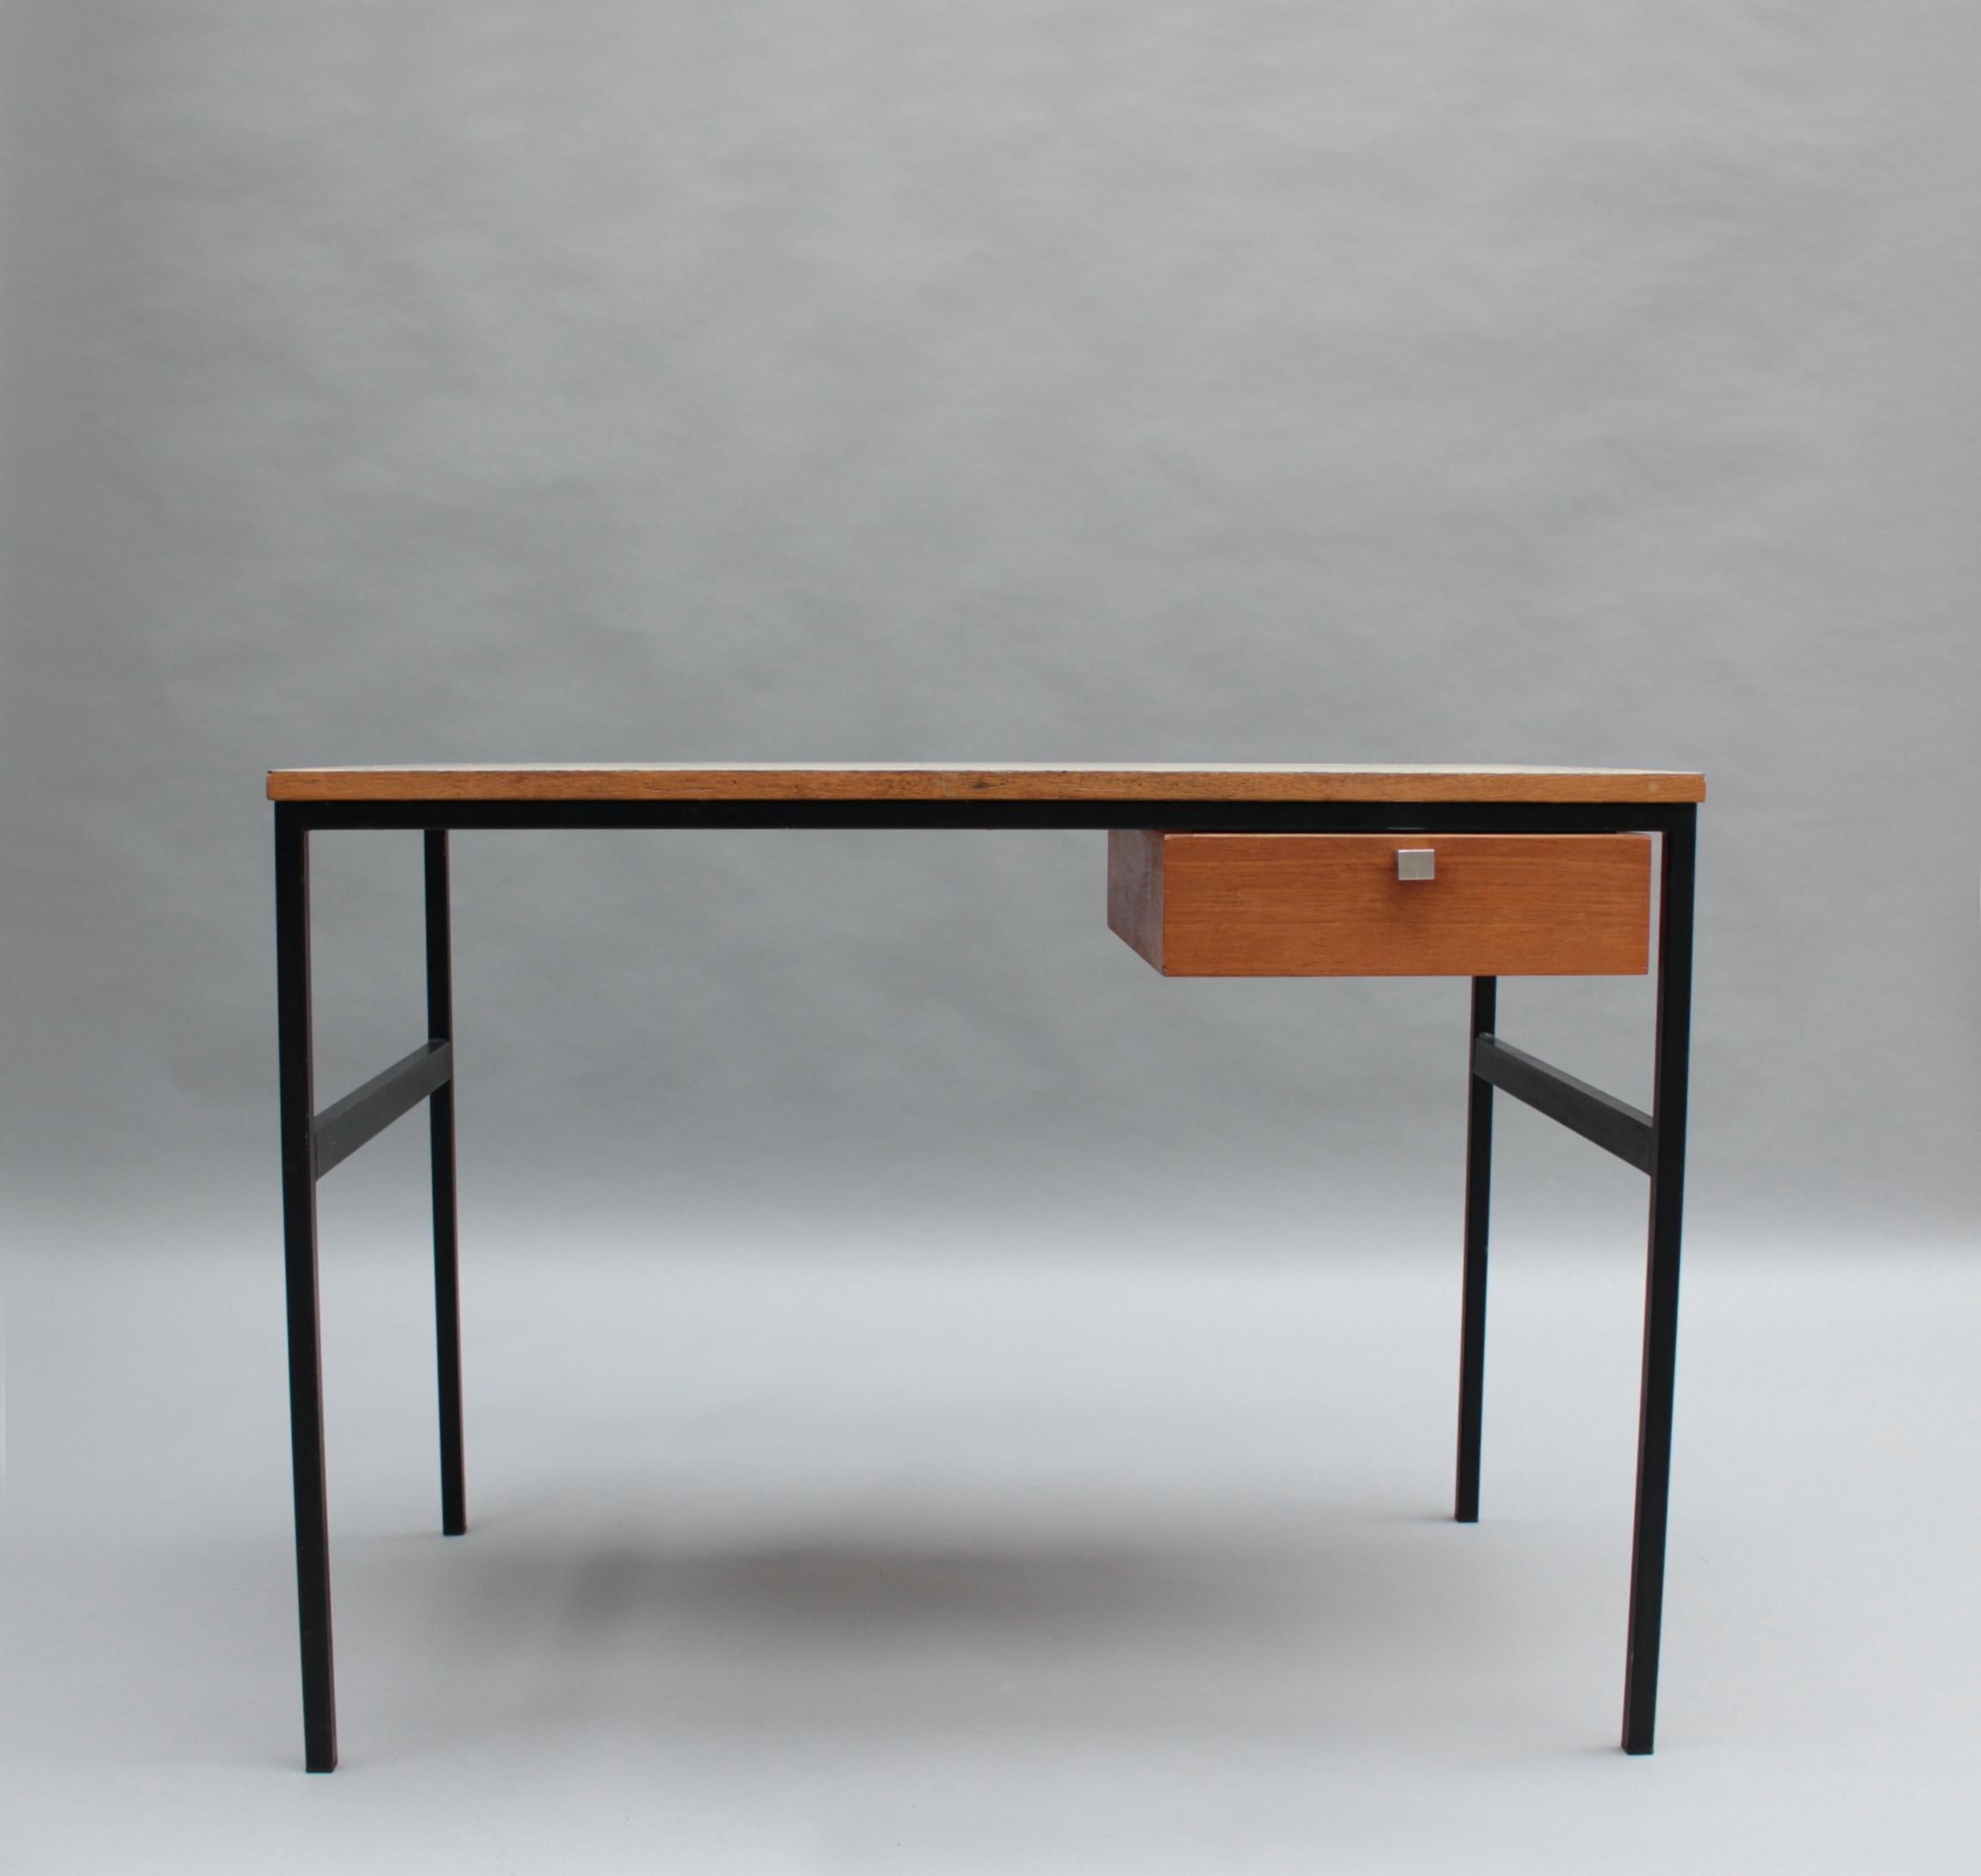 Pierre Paulin (1927-2009) - A fine French Mid-Century writing table with a black lacquered tubular metal base, a white laminated plywood top and a wooden drawer with a metal pull. Model CM 217, Edition Thonet 1962